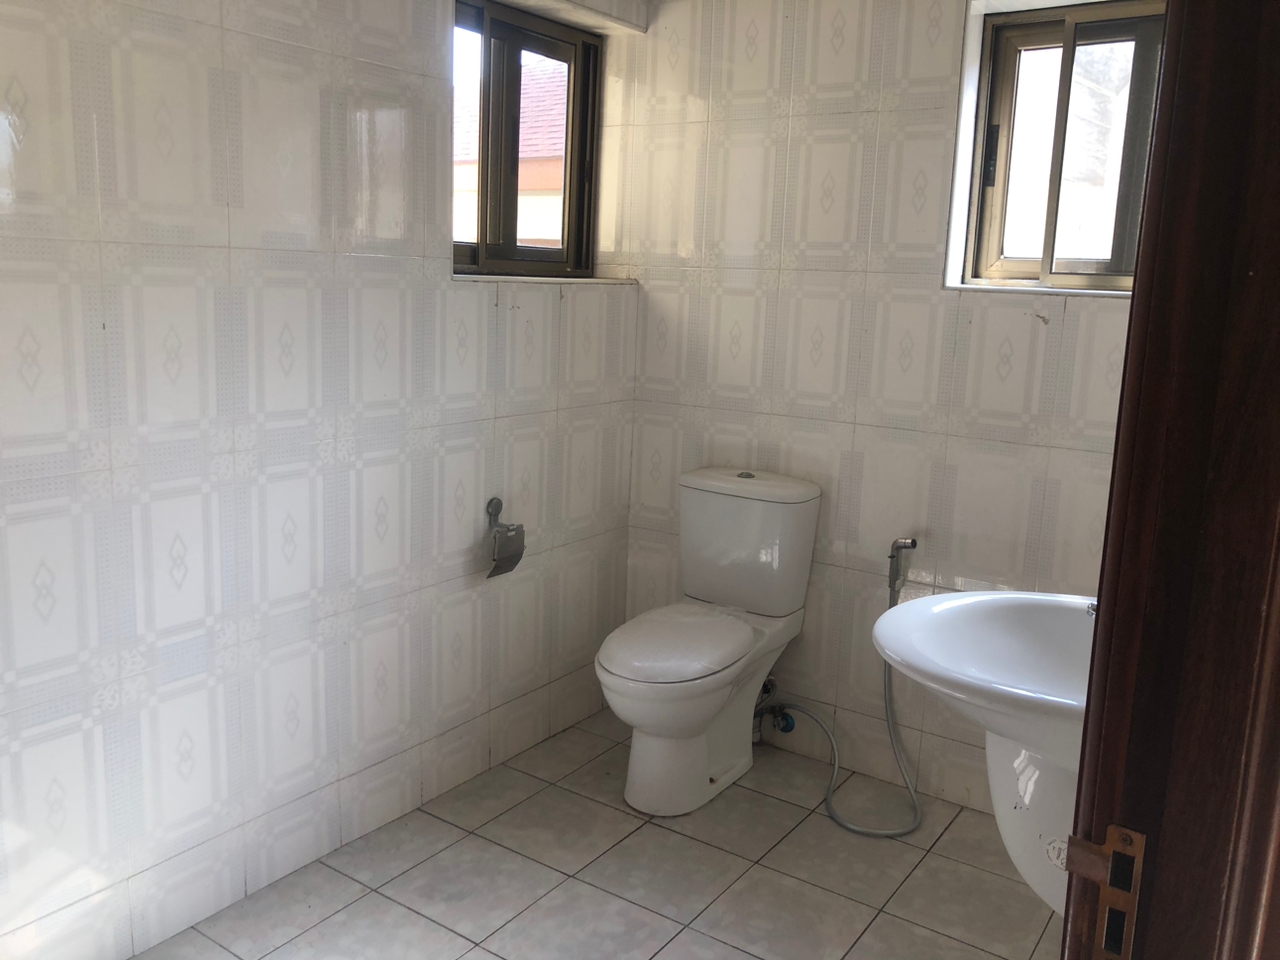 EXECUTIVE 4 BEDROOM SEMI-DETACHED HOUSE WITH OUTHOUSE AT LABONE FOR RENT